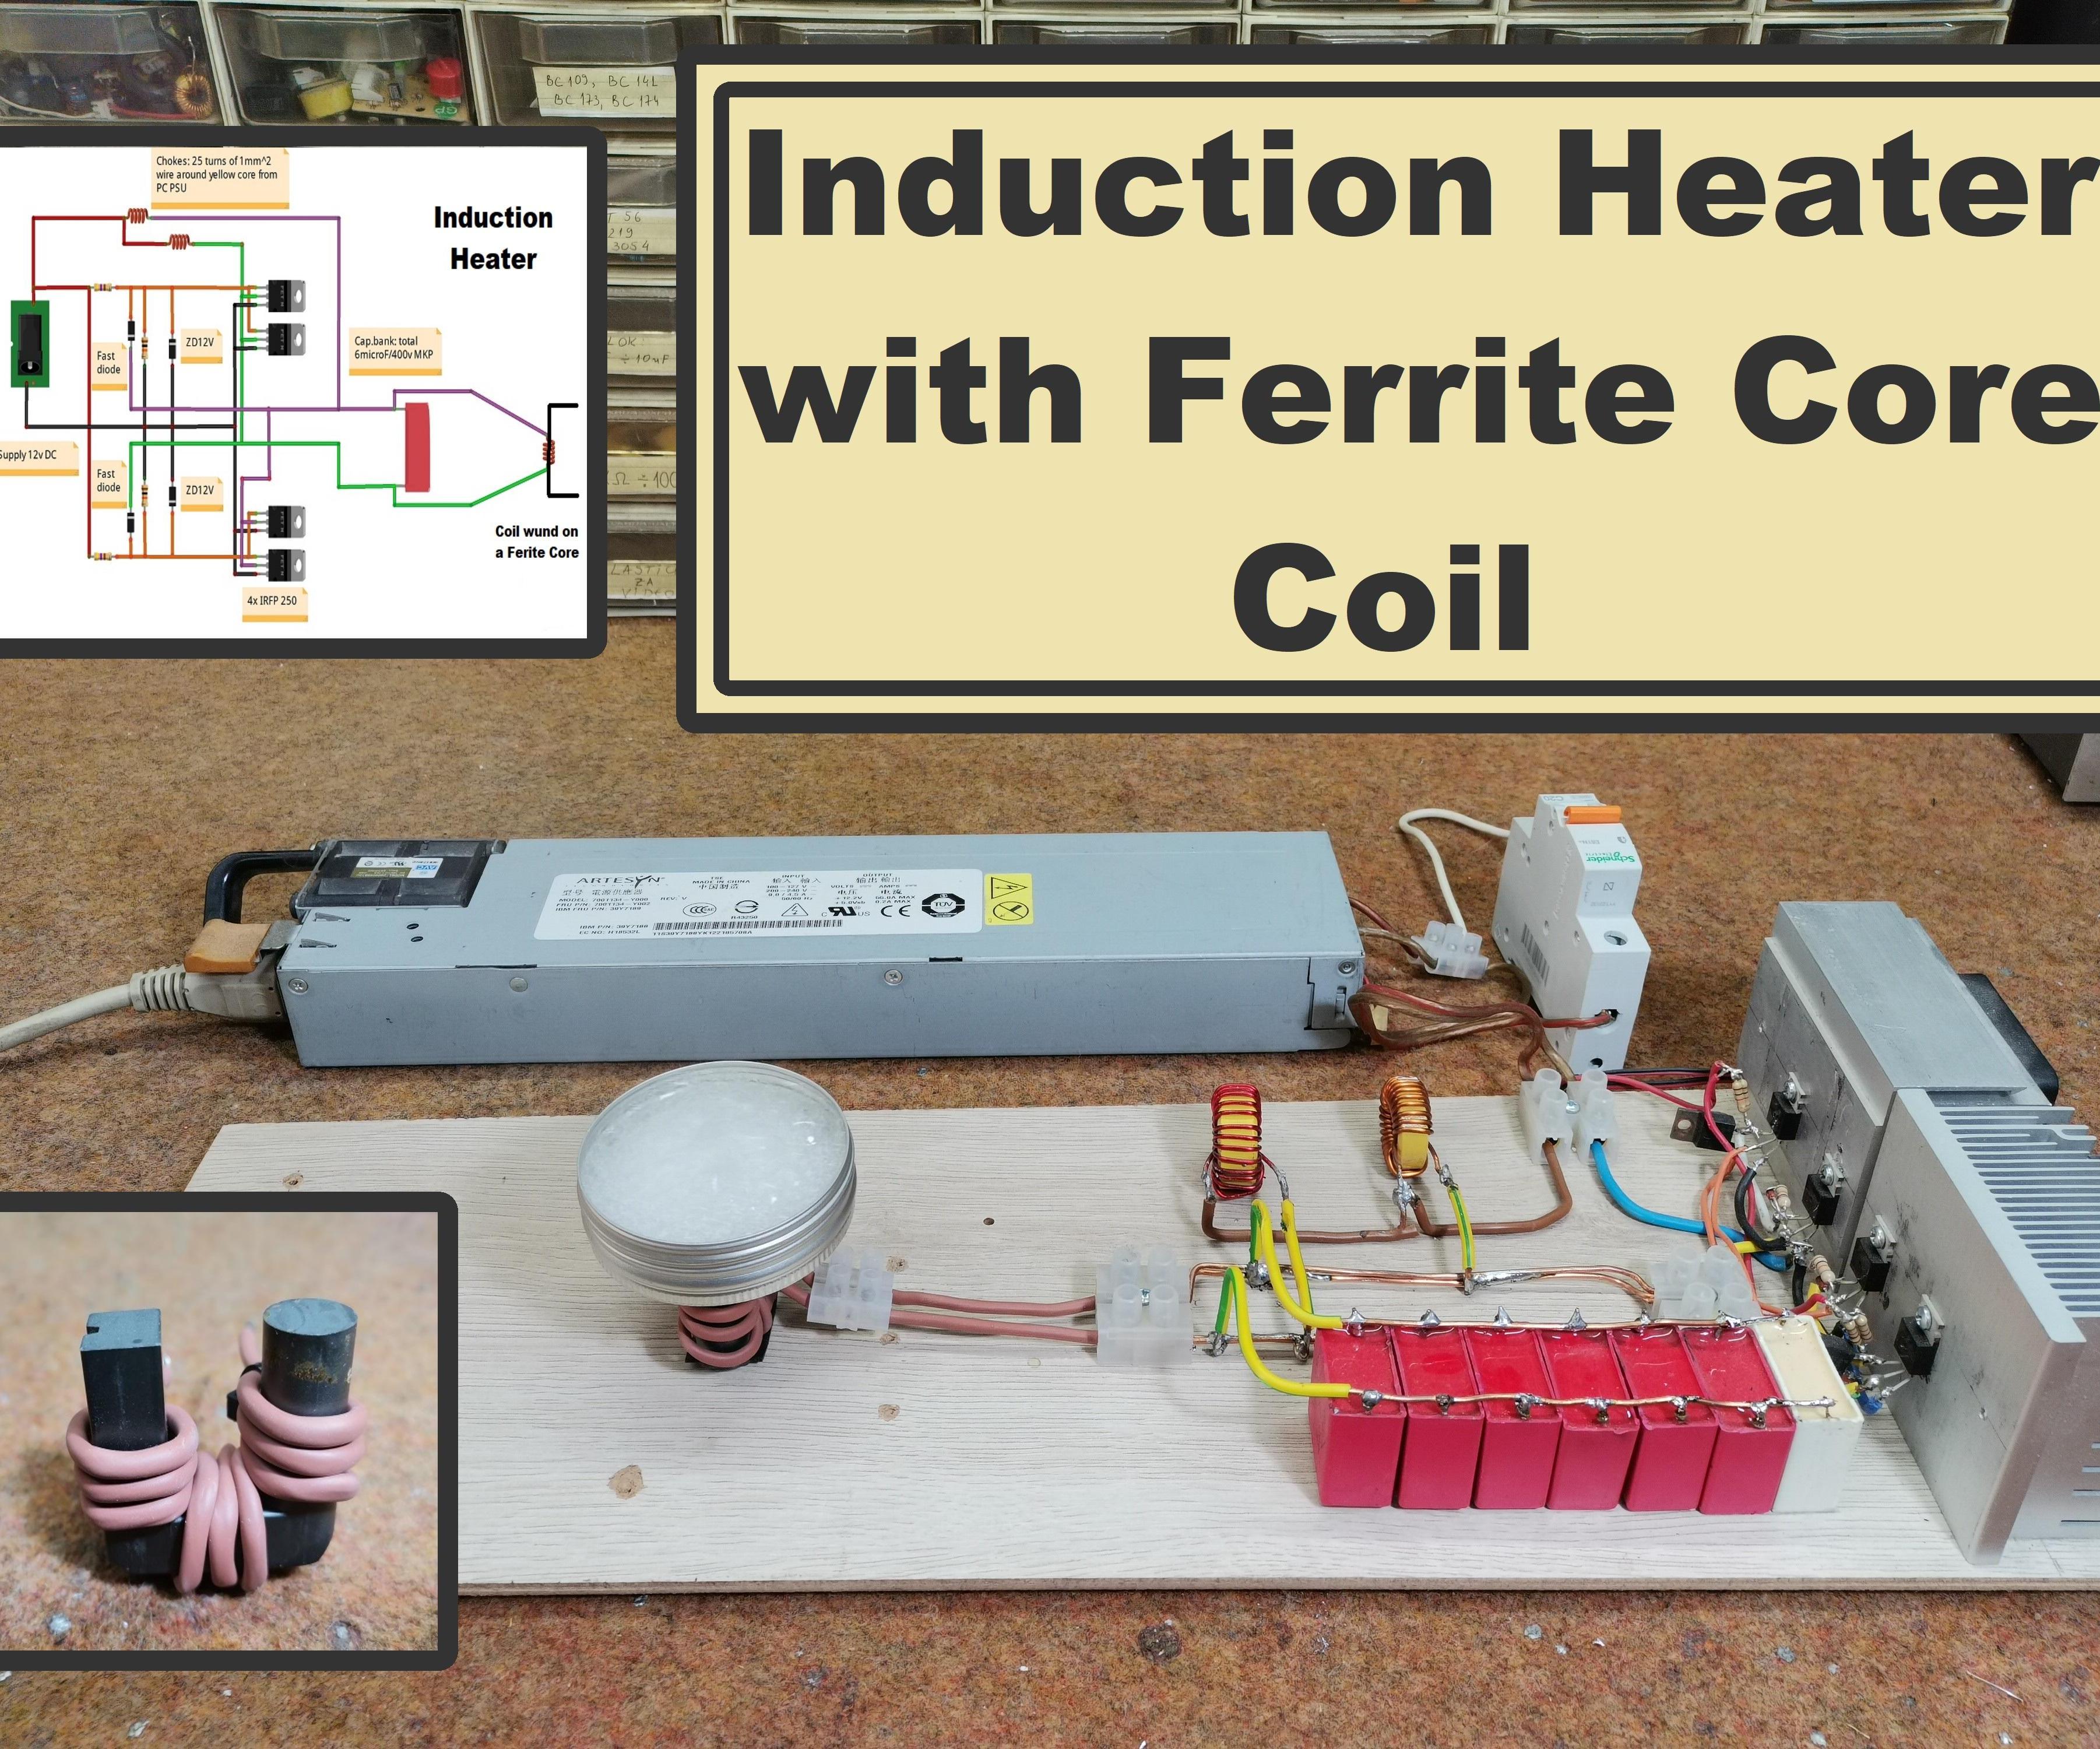 DIY Induction Heater With Frrite Core Coil